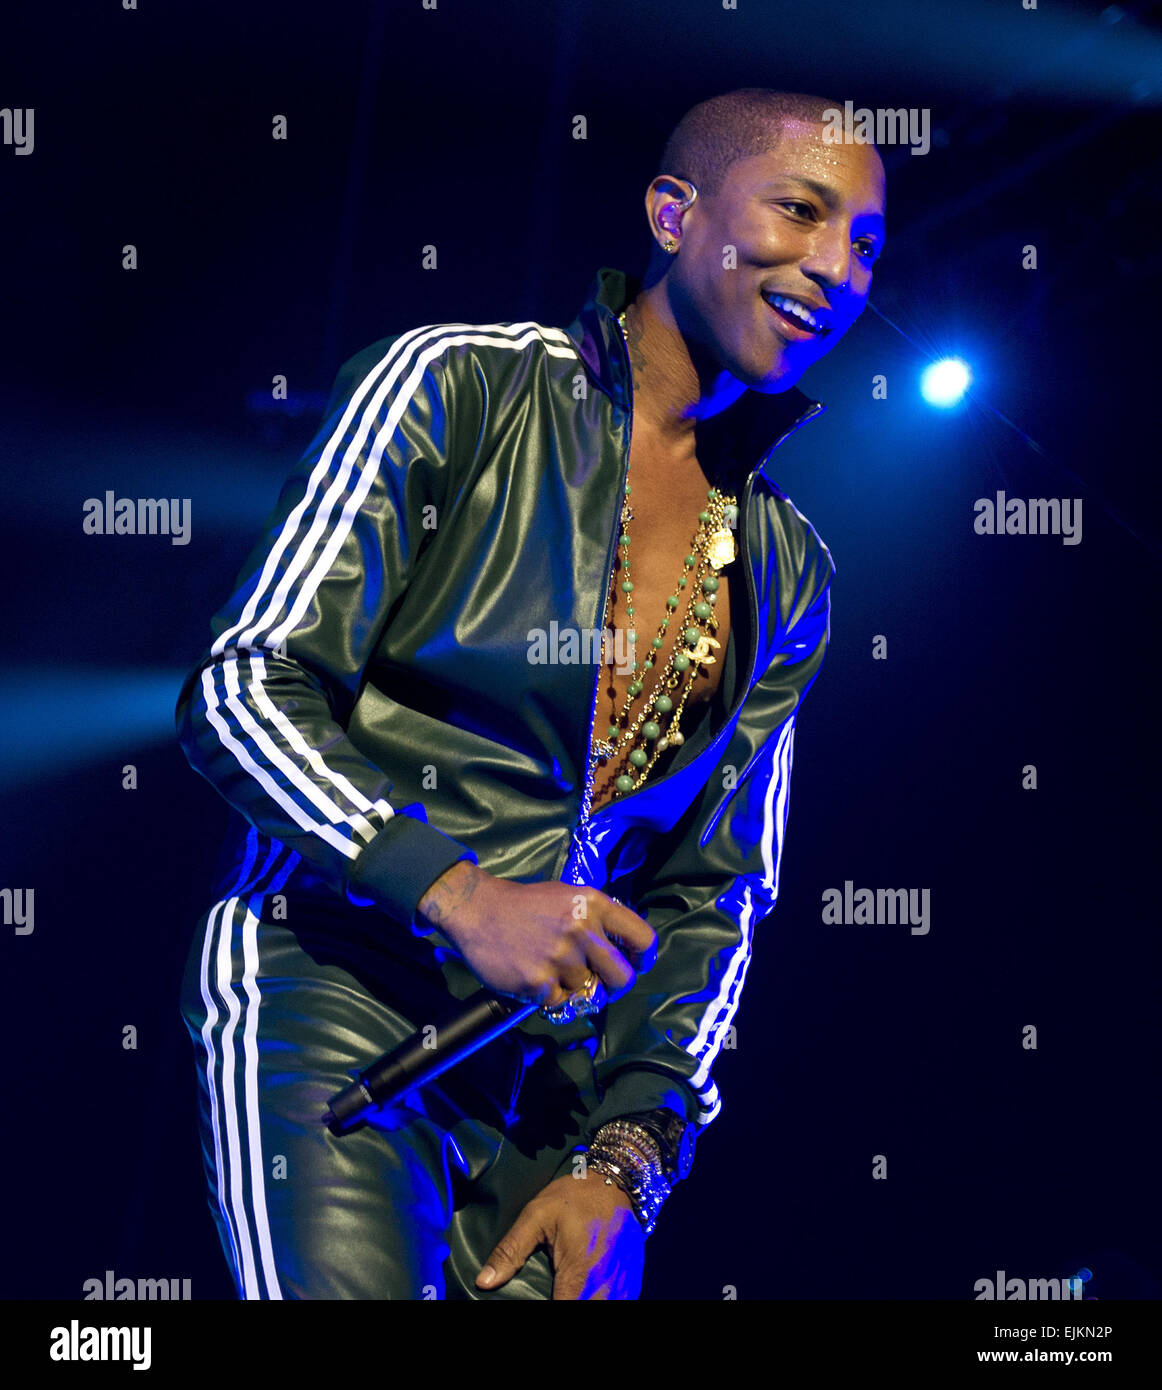 Pharrell Williams performs at the the Ziggo Dome in Amsterdam as part of his 'Dear Girl' tour Featuring: Pharrell Williams Where: Amsterdam, Netherlands When: 23 Sep 2014 Stock Photo